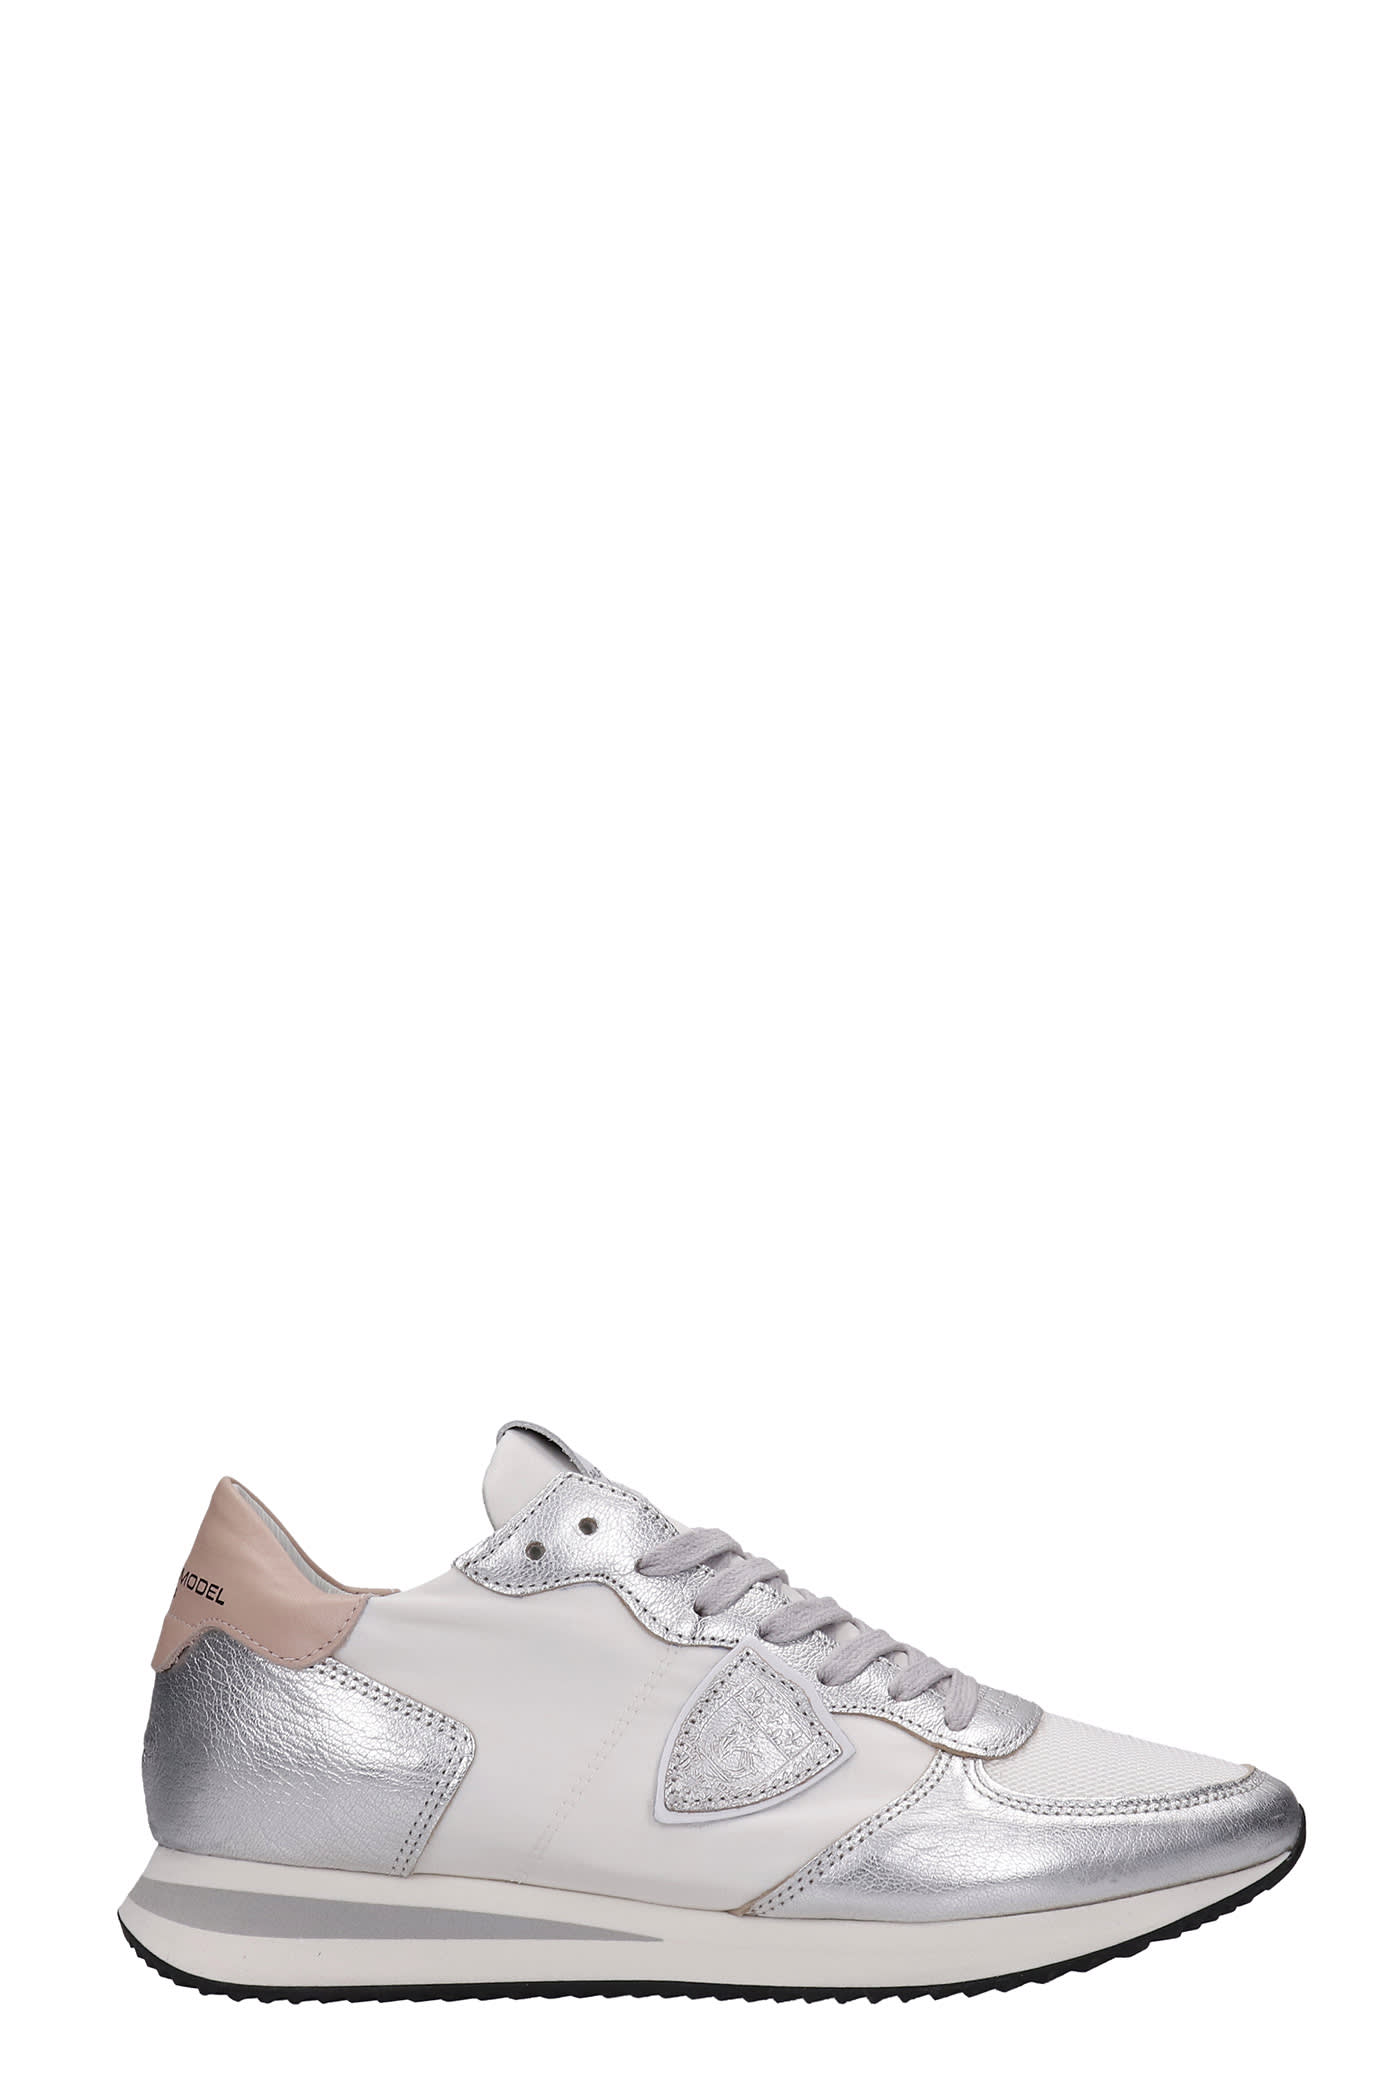 Philippe Model Trpx Sneakers In White Leather And Fabric